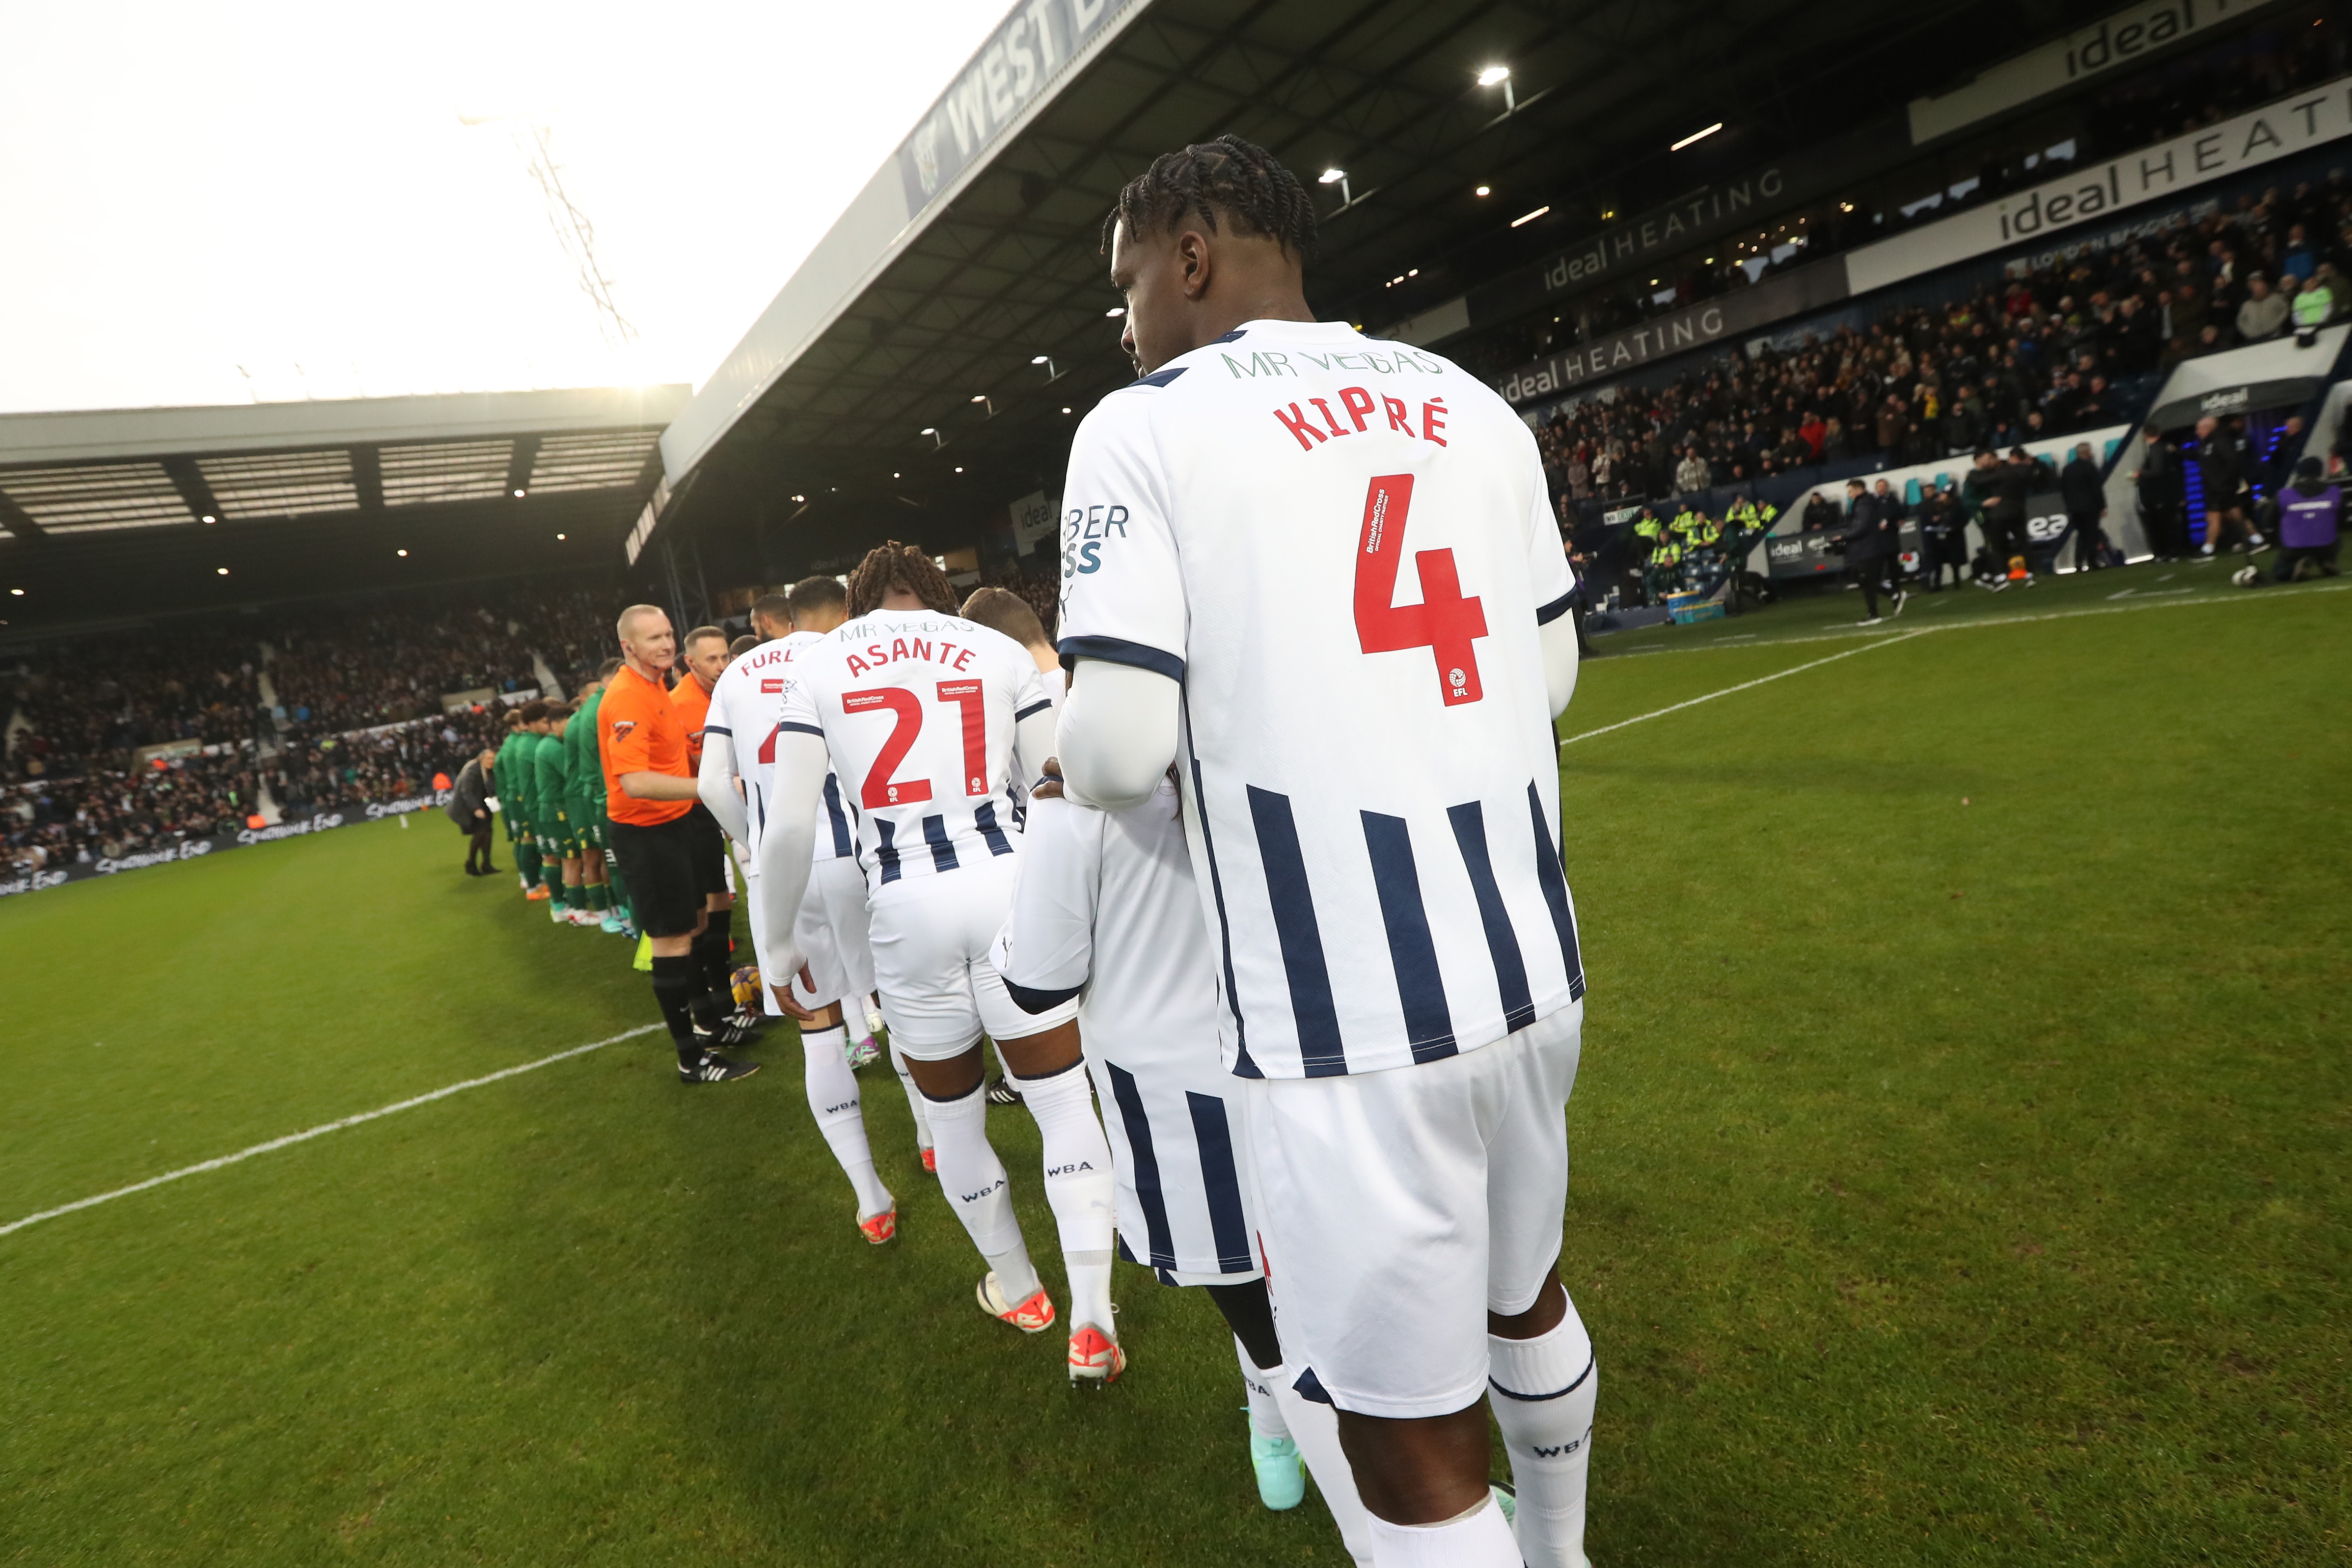 Cedric Kipre with his back to the camera lining up before taking on Norwich